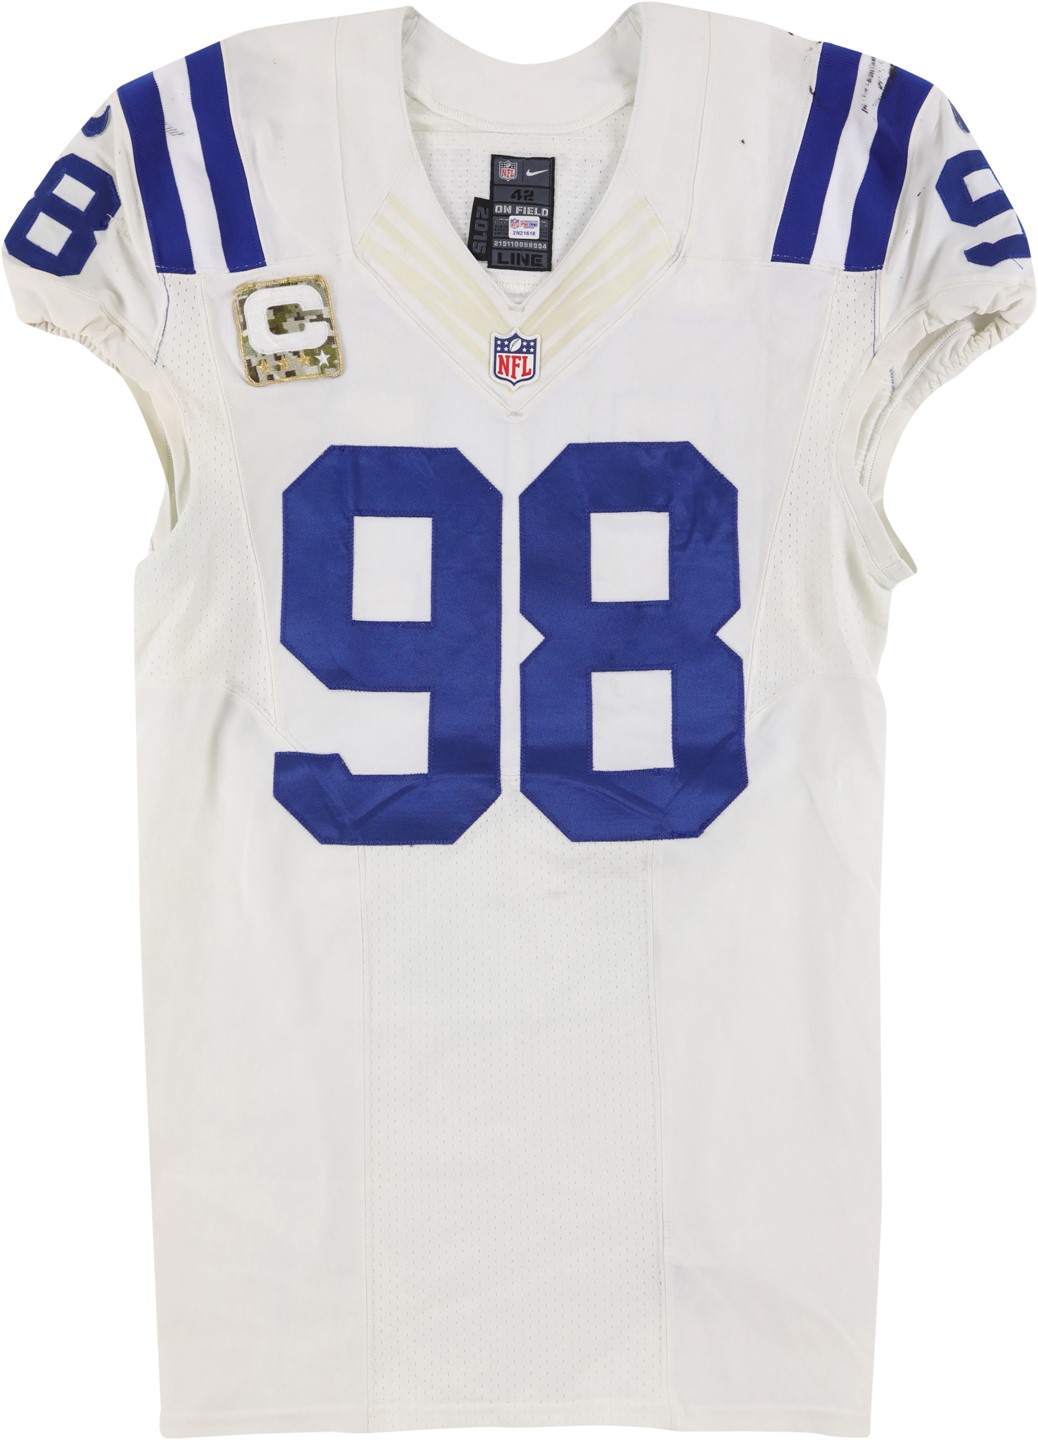 11/22/15 Robert Mathis "Salute to Service" Indianapolis Colts Signed Game Worn Jersey (Photo-Matched & NFL PSA)